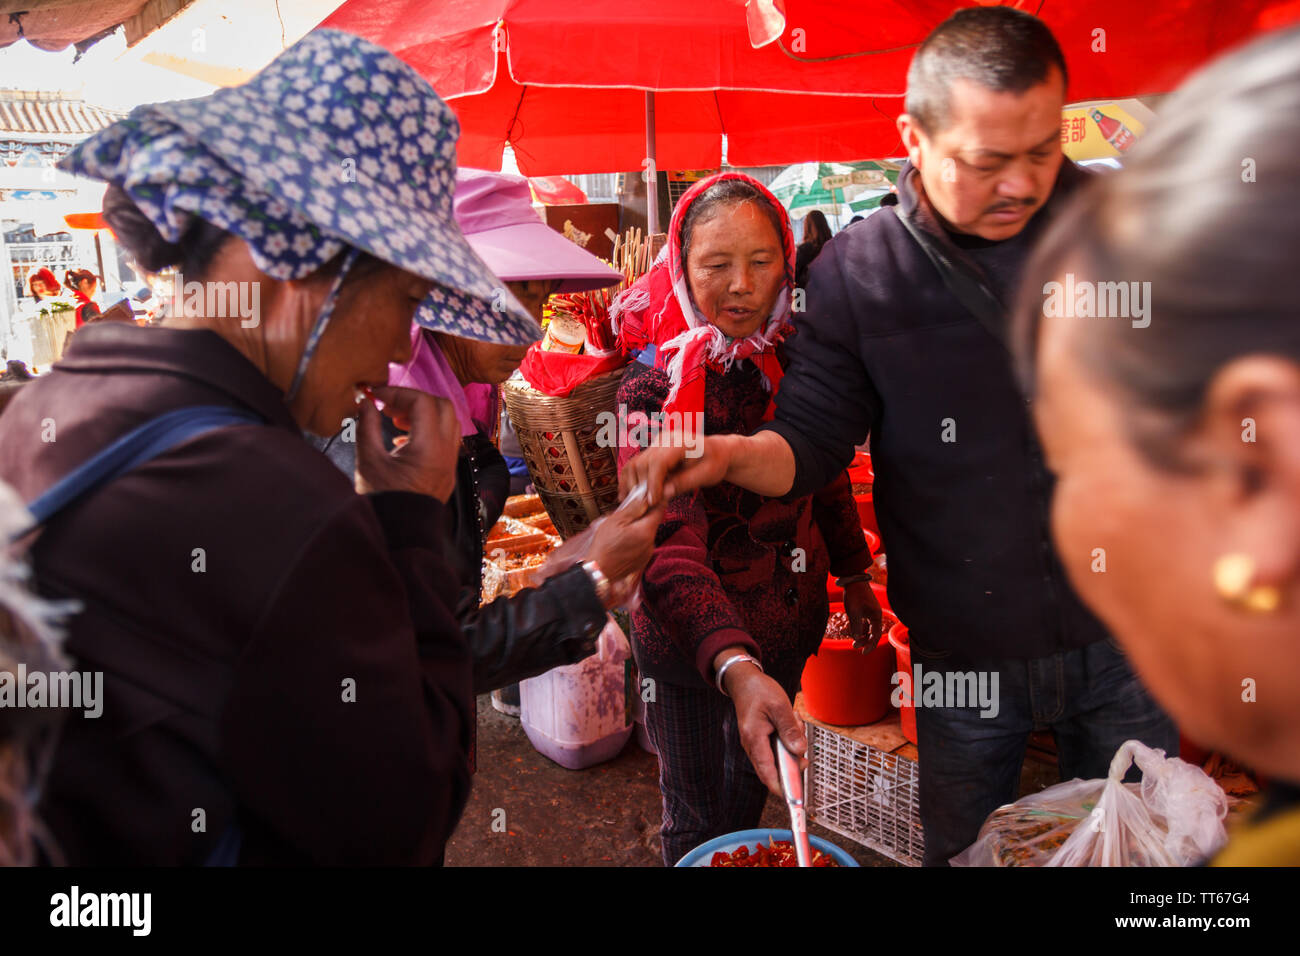 01 Feb 2017- Dali, China people at country busy market Stock Photo